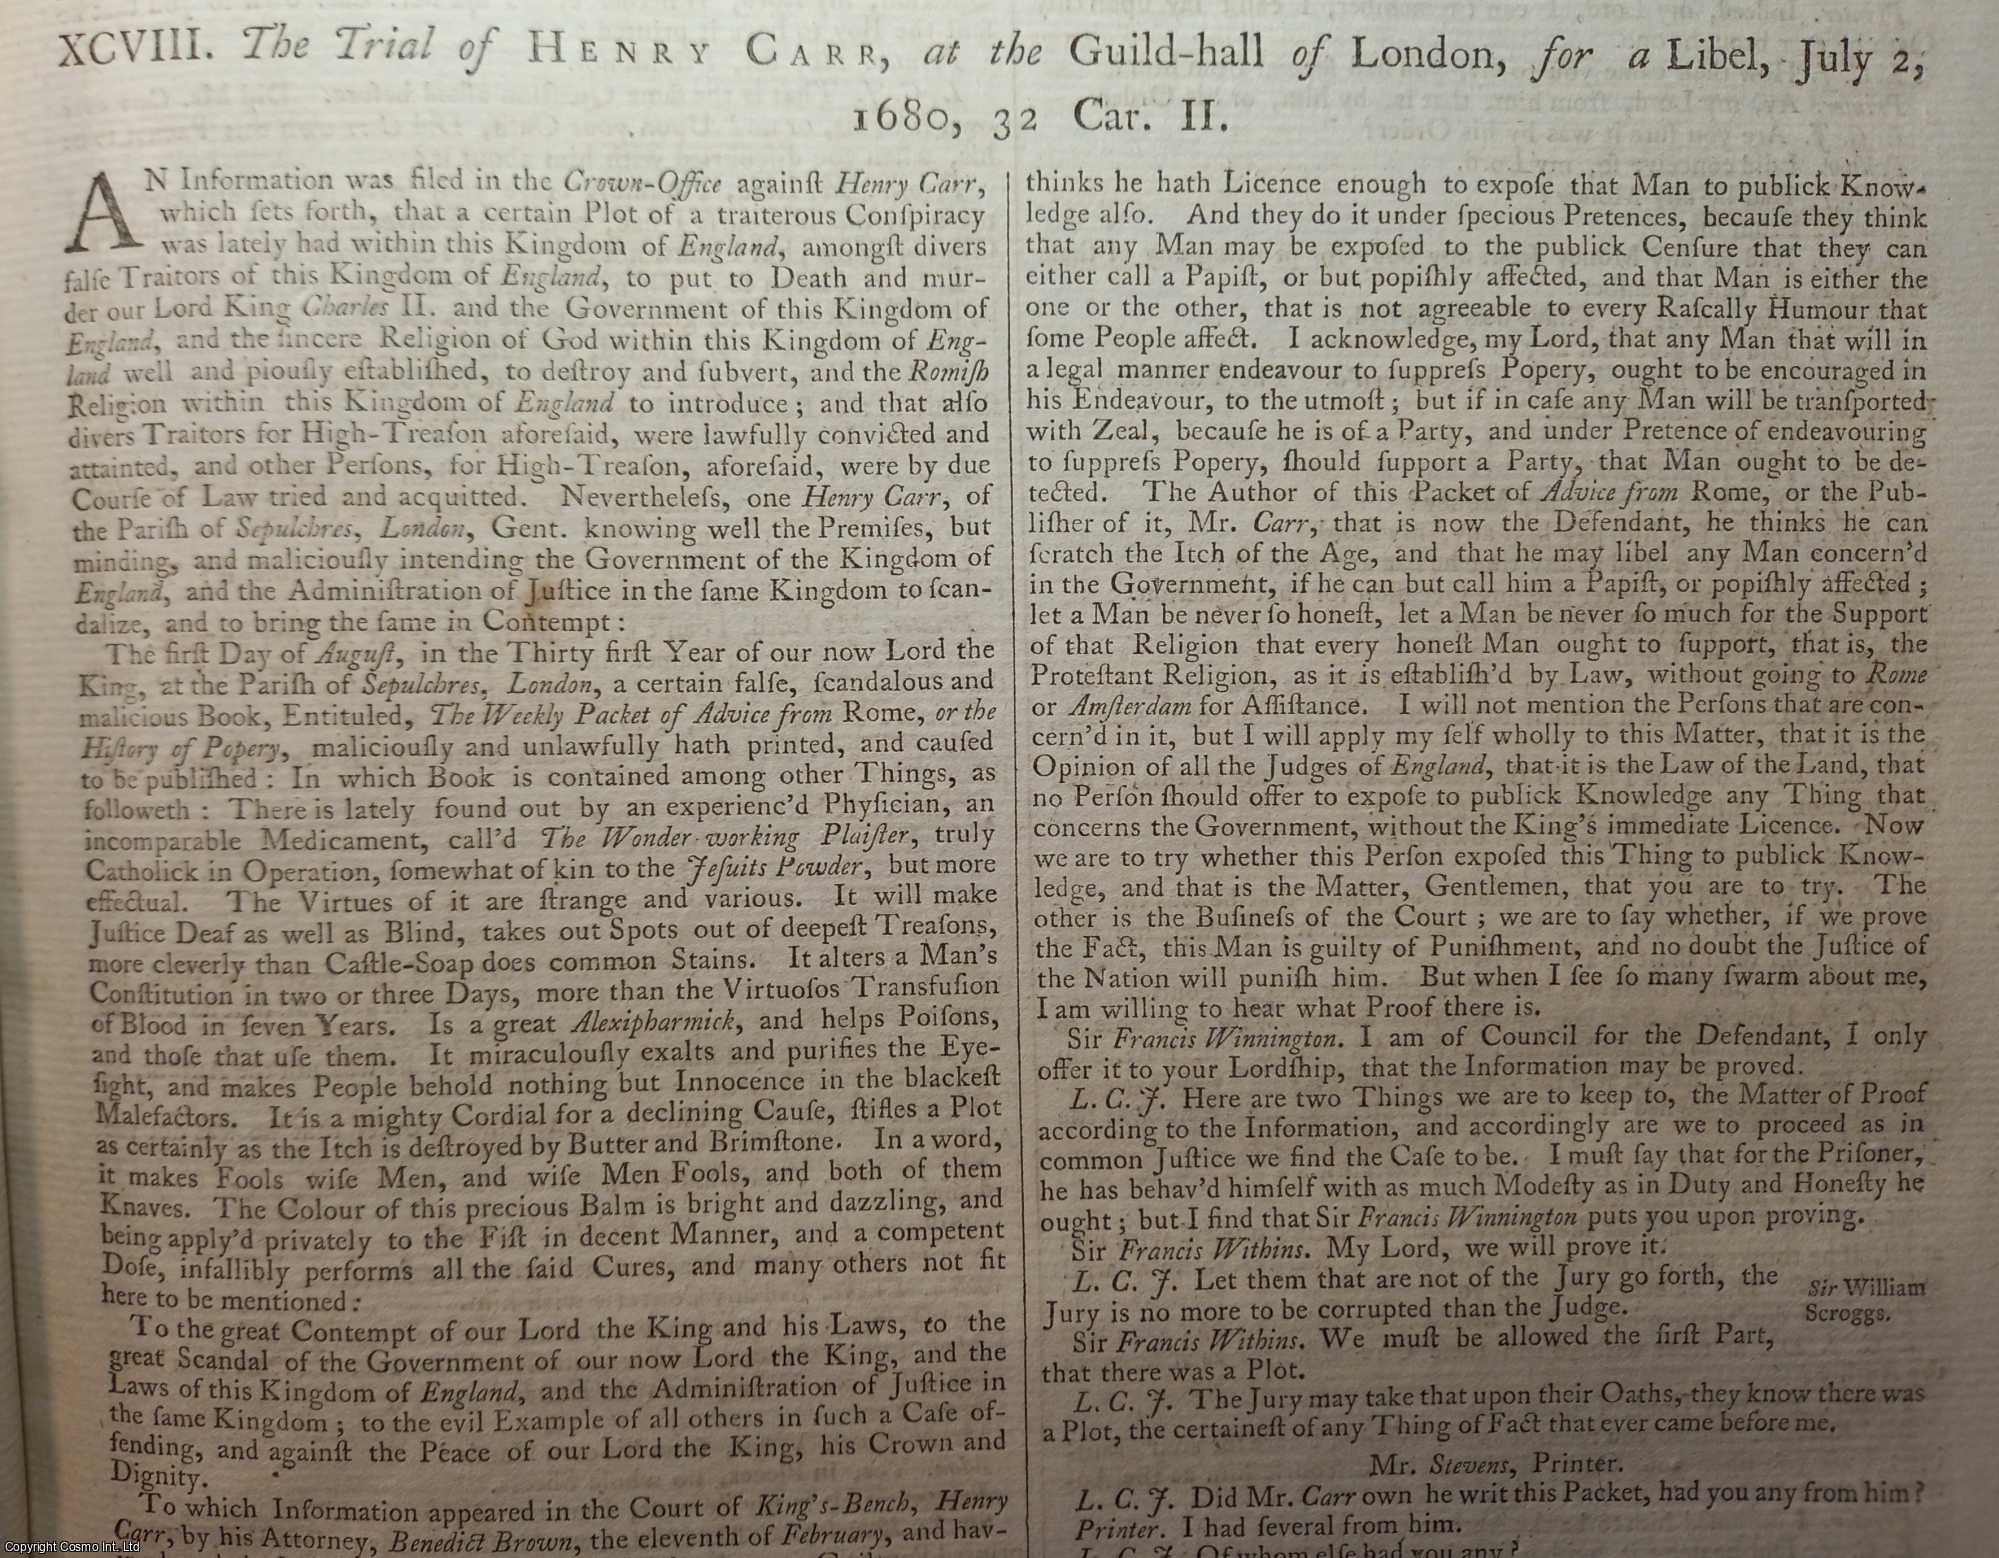 [Trial] - The Trial of Henry Carr, on an Information for publishing a false and scandalous Libel, at Guildhall London, 1680. An original article from the Collected State Trials.